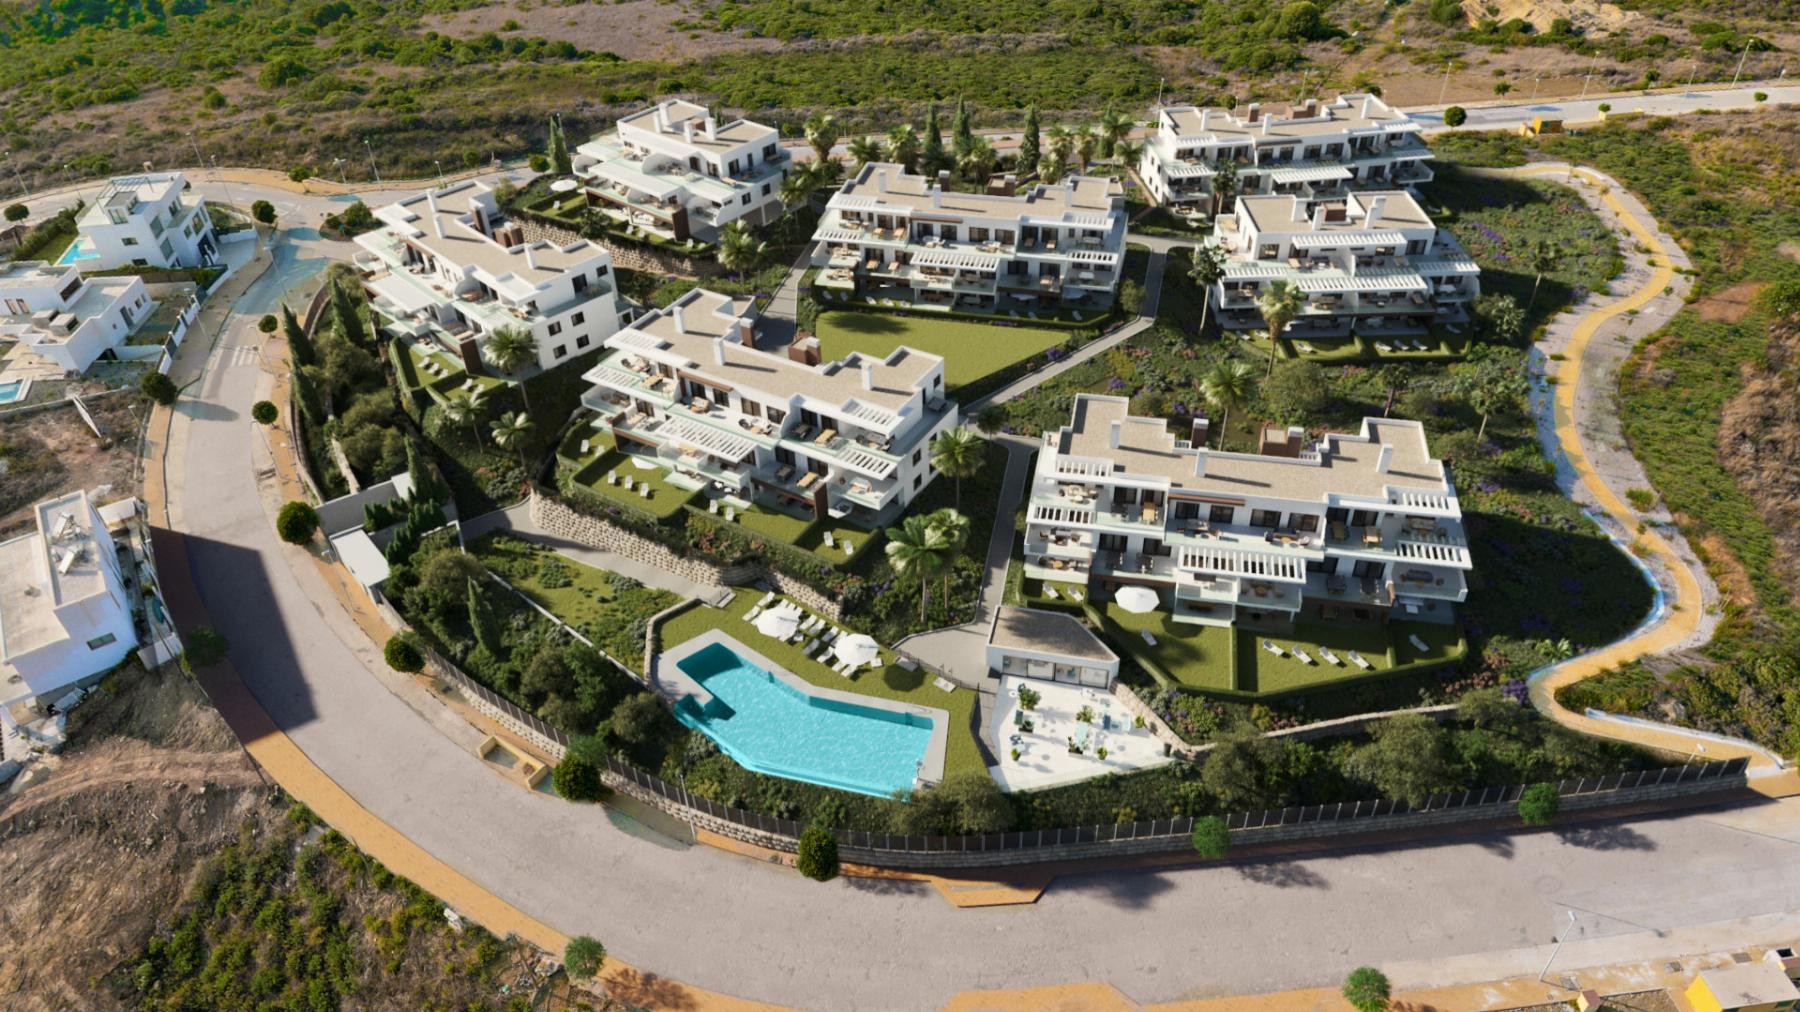 Azata Delmare: Apartments with 2 and 3 bedrooms with ocean view in Casares Costa. | Image 0